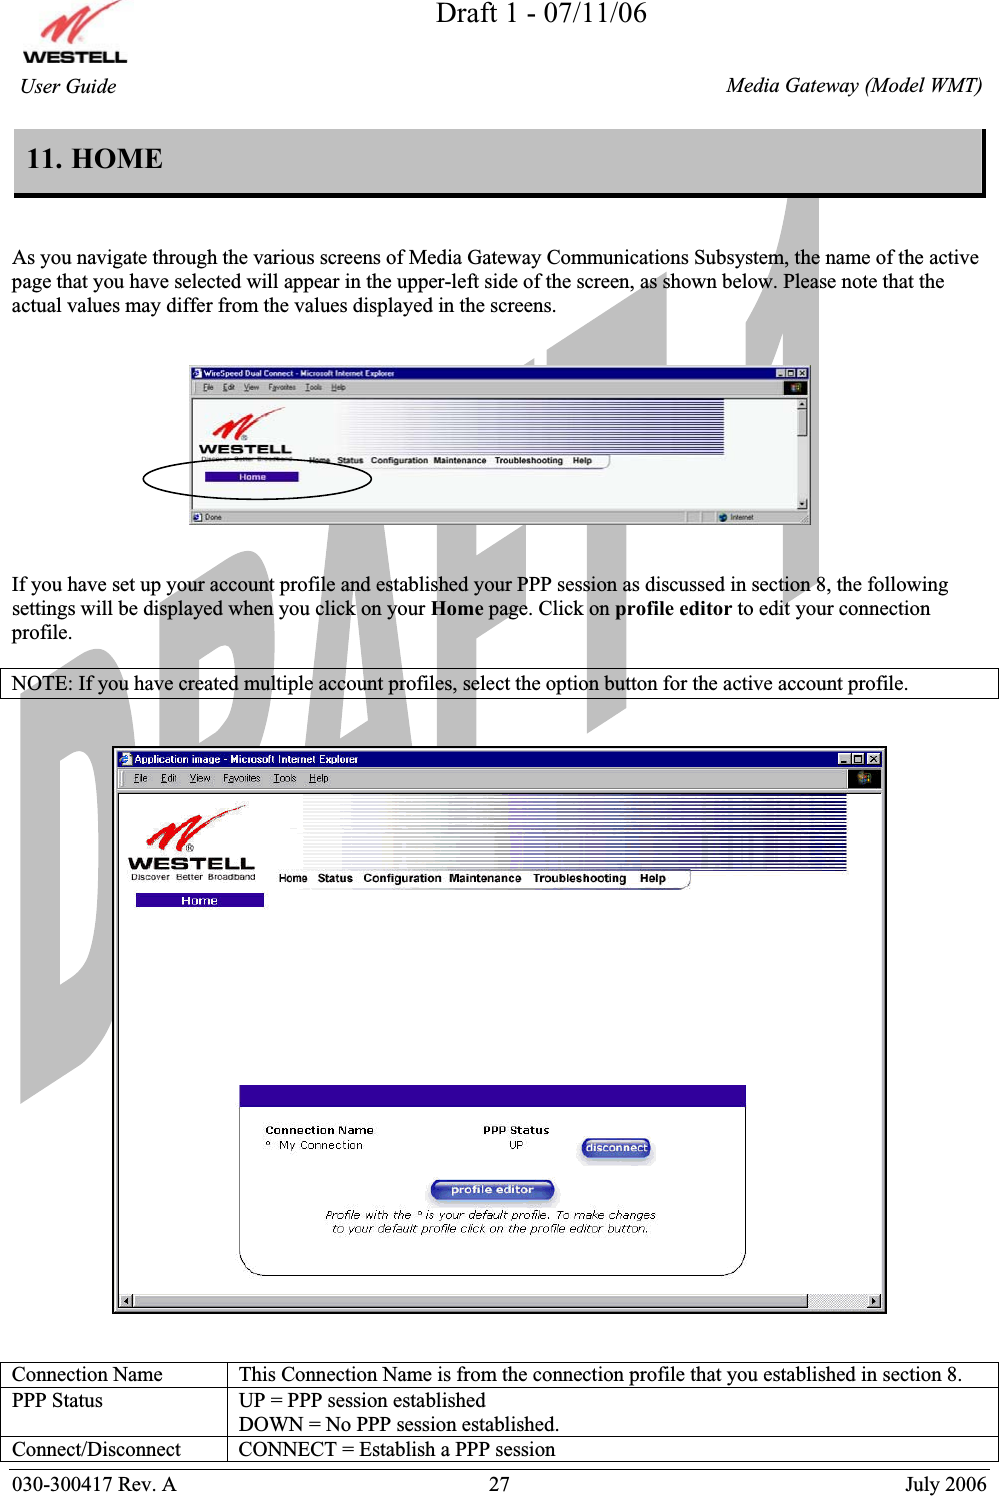 Draft 1 - 07/11/06030-300417 Rev. A  27  July 2006  Media Gateway (Model WMT) User Guide 11. HOME  As you navigate through the various screens of Media Gateway Communications Subsystem, the name of the active page that you have selected will appear in the upper-left side of the screen, as shown below. Please note that the actual values may differ from the values displayed in the screens. If you have set up your account profile and established your PPP session as discussed in section 8, the following settings will be displayed when you click on your Home page. Click on profile editor to edit your connection profile. NOTE: If you have created multiple account profiles, select the option button for the active account profile. Connection Name   This Connection Name is from the connection profile that you established in section 8.PPP Status  UP = PPP session established DOWN = No PPP session established.Connect/Disconnect   CONNECT = Establish a PPP session 